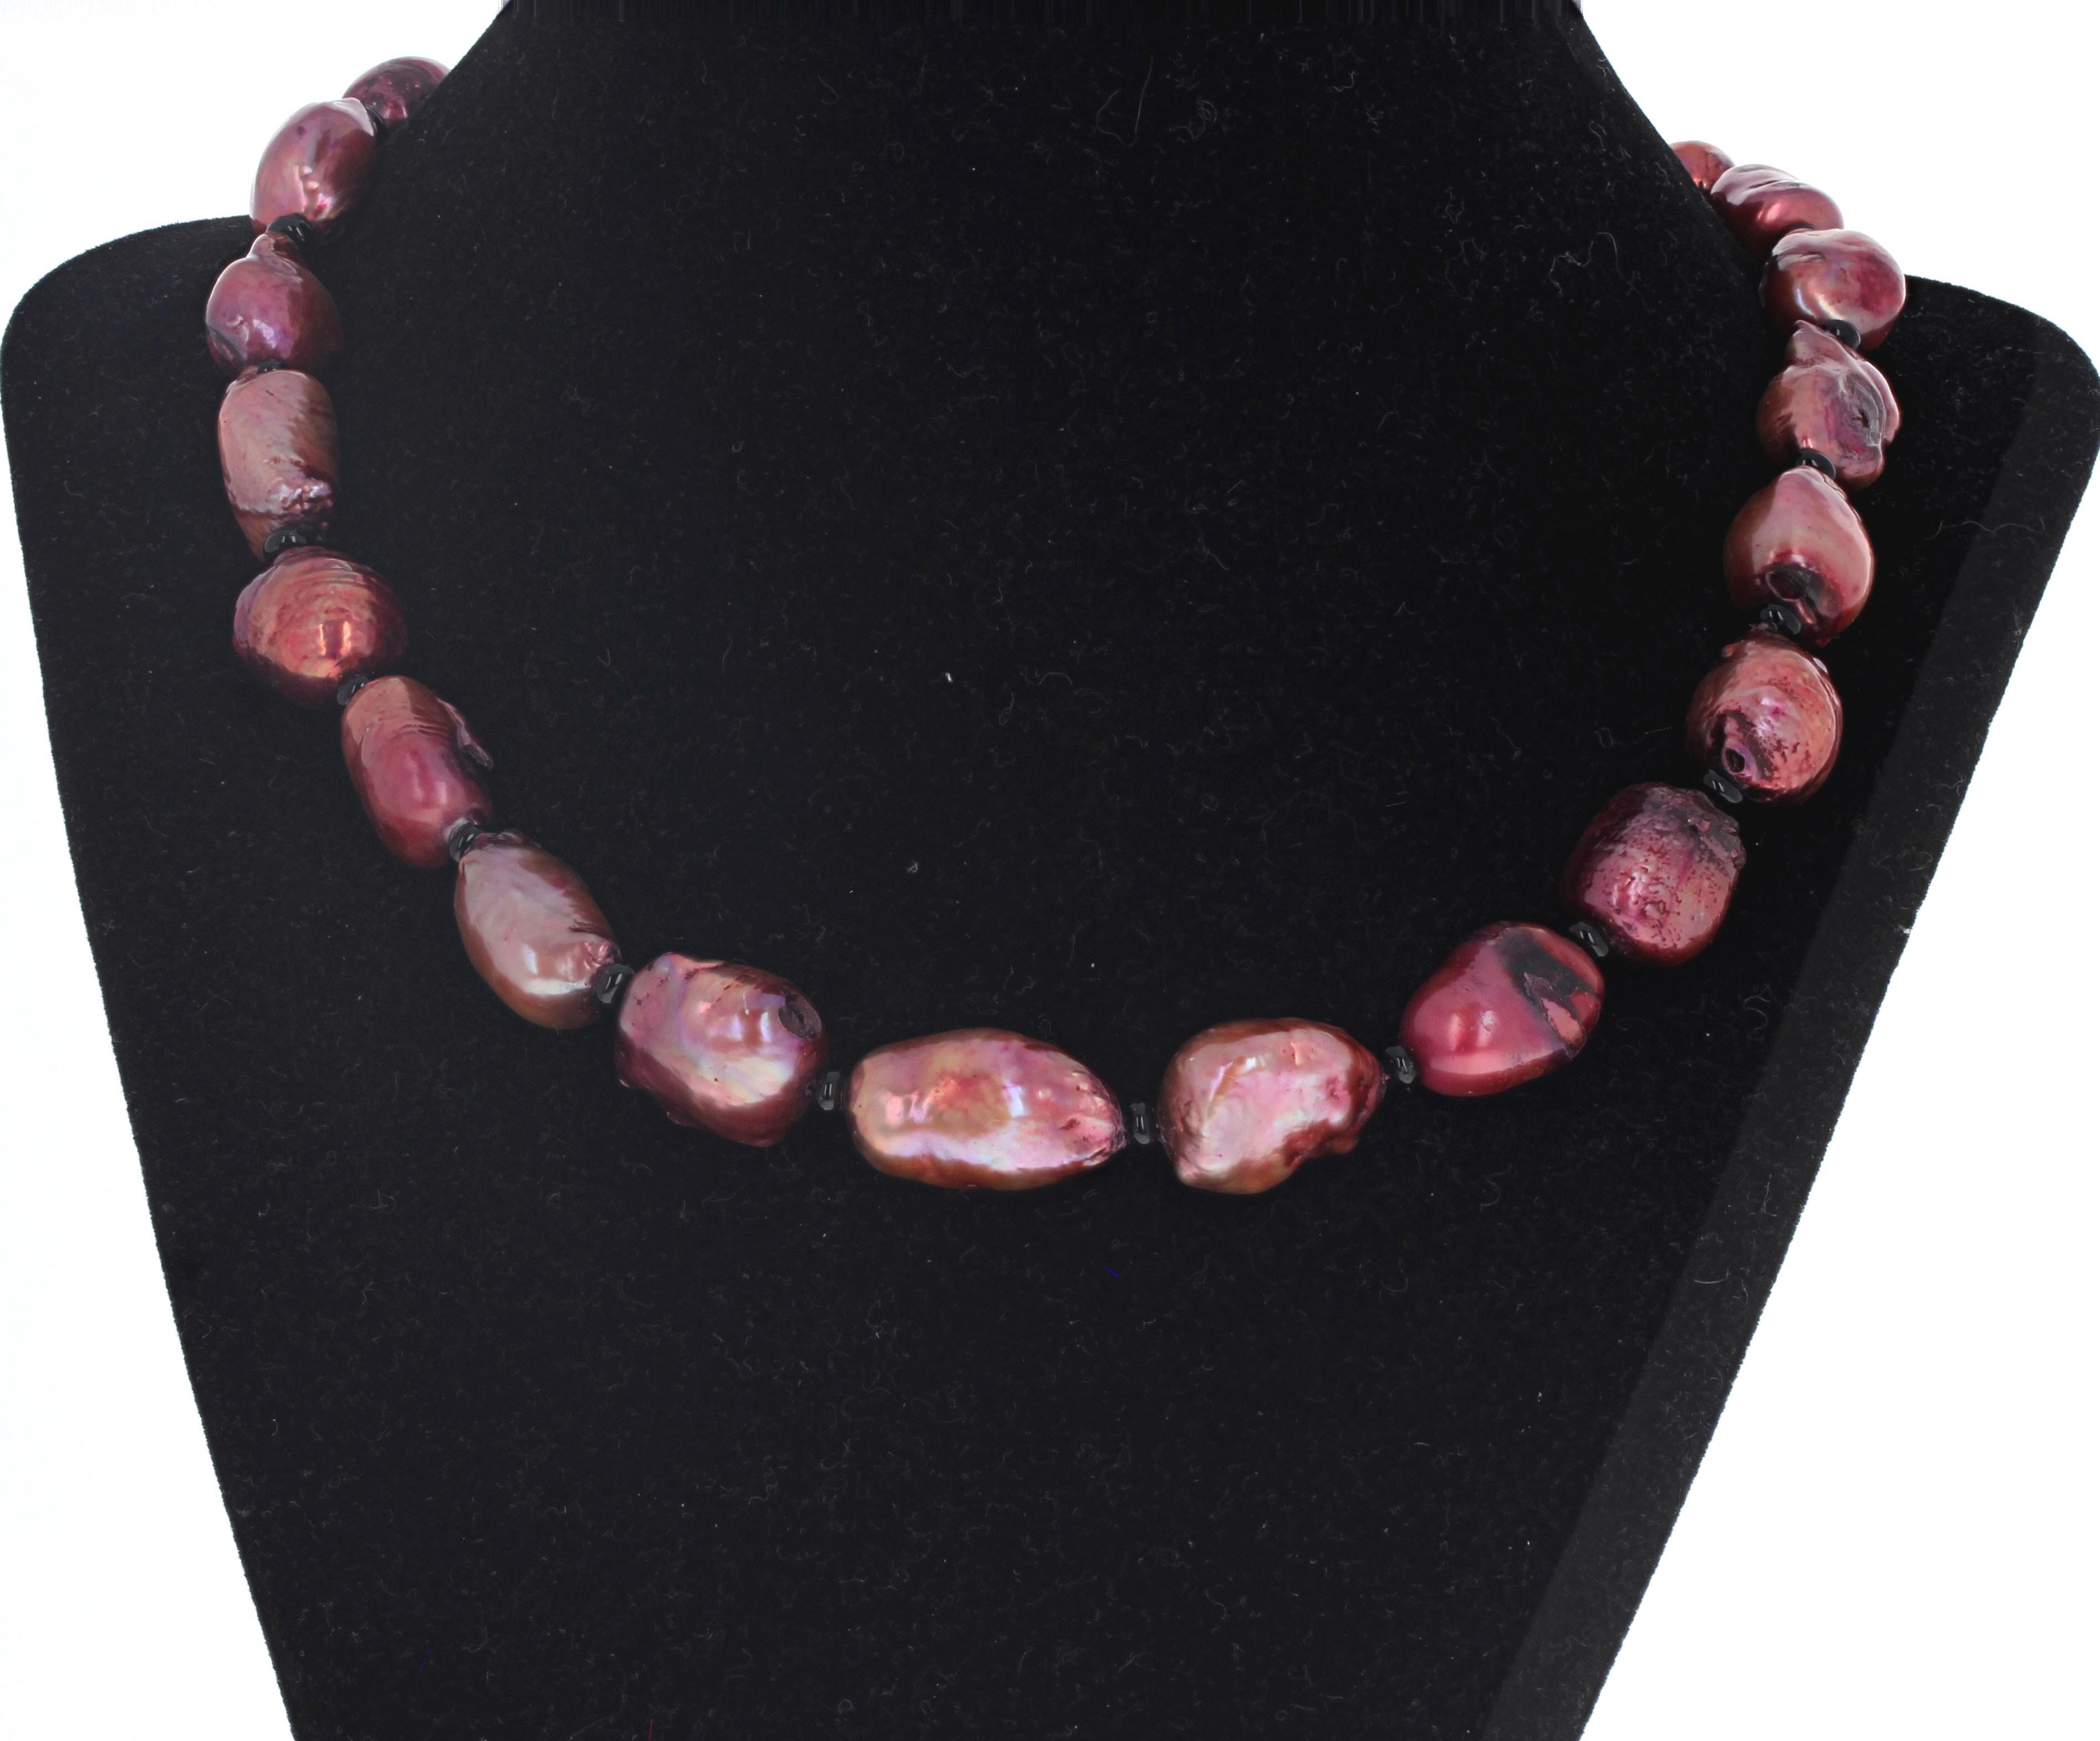 This simple fascinating pinky/coppery cultured Pearl necklace is 17 1/2 inches long.  The largest Pearl is approximately 22mm x 13mm and they are all enhanced by little tiny natural black Onyx rondels.  The clasp is an easy to use silver hook clasp.